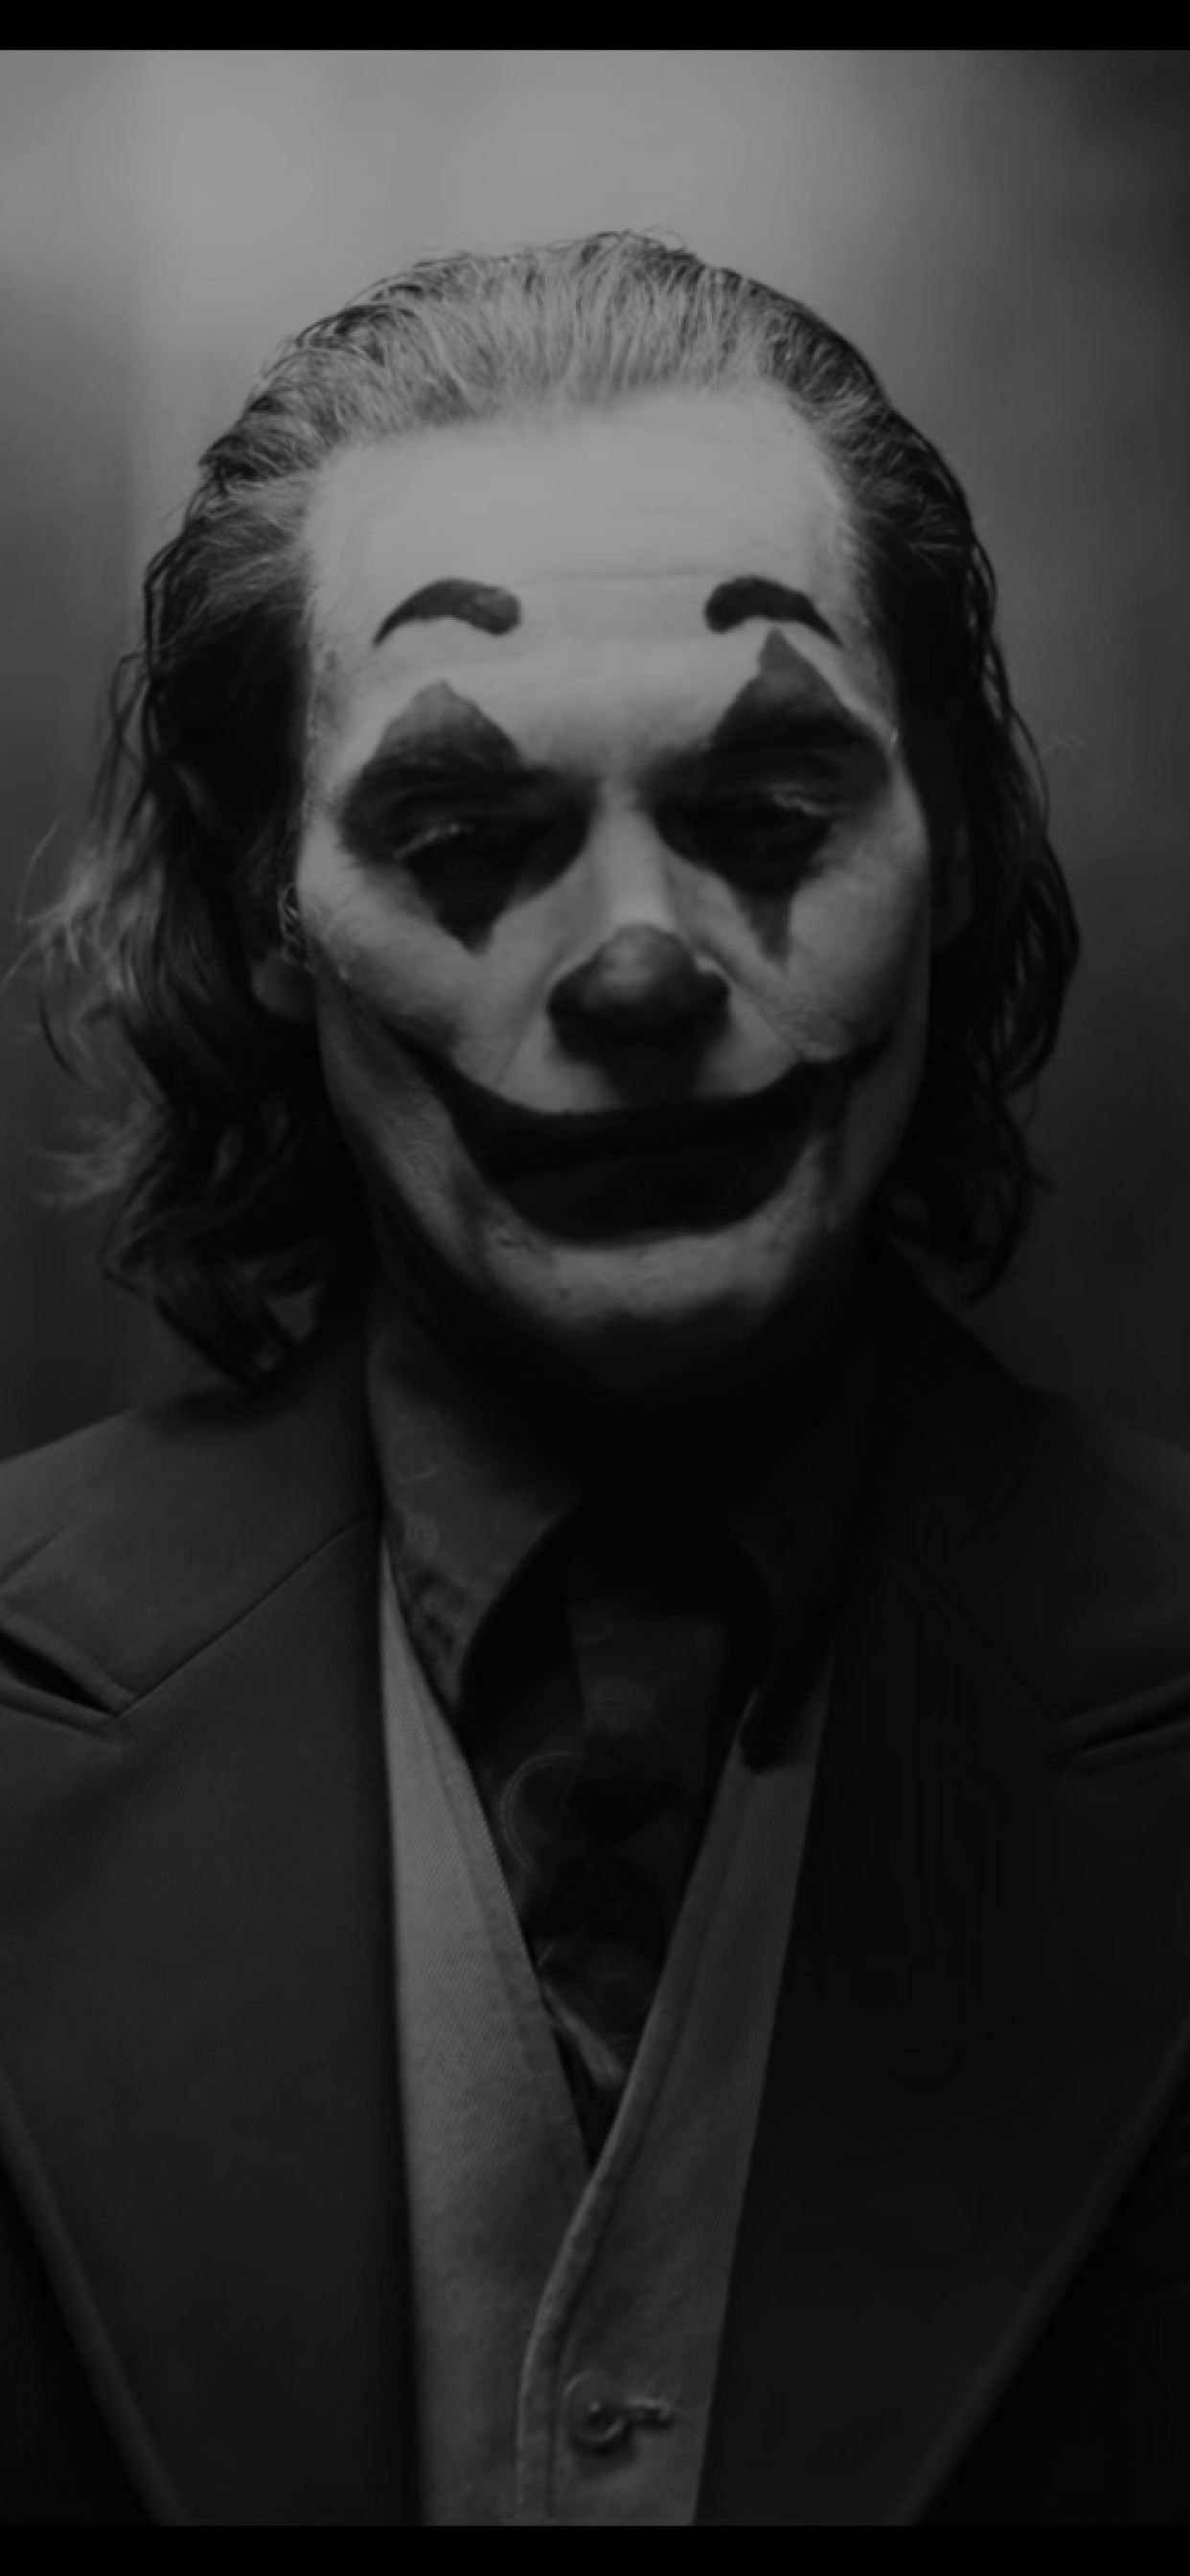 1242x26 Joaquin Phoenix As Joker Monochrome Iphone Xs Max Wallpaper Hd Movies 4k Wallpapers Images Photos And Background